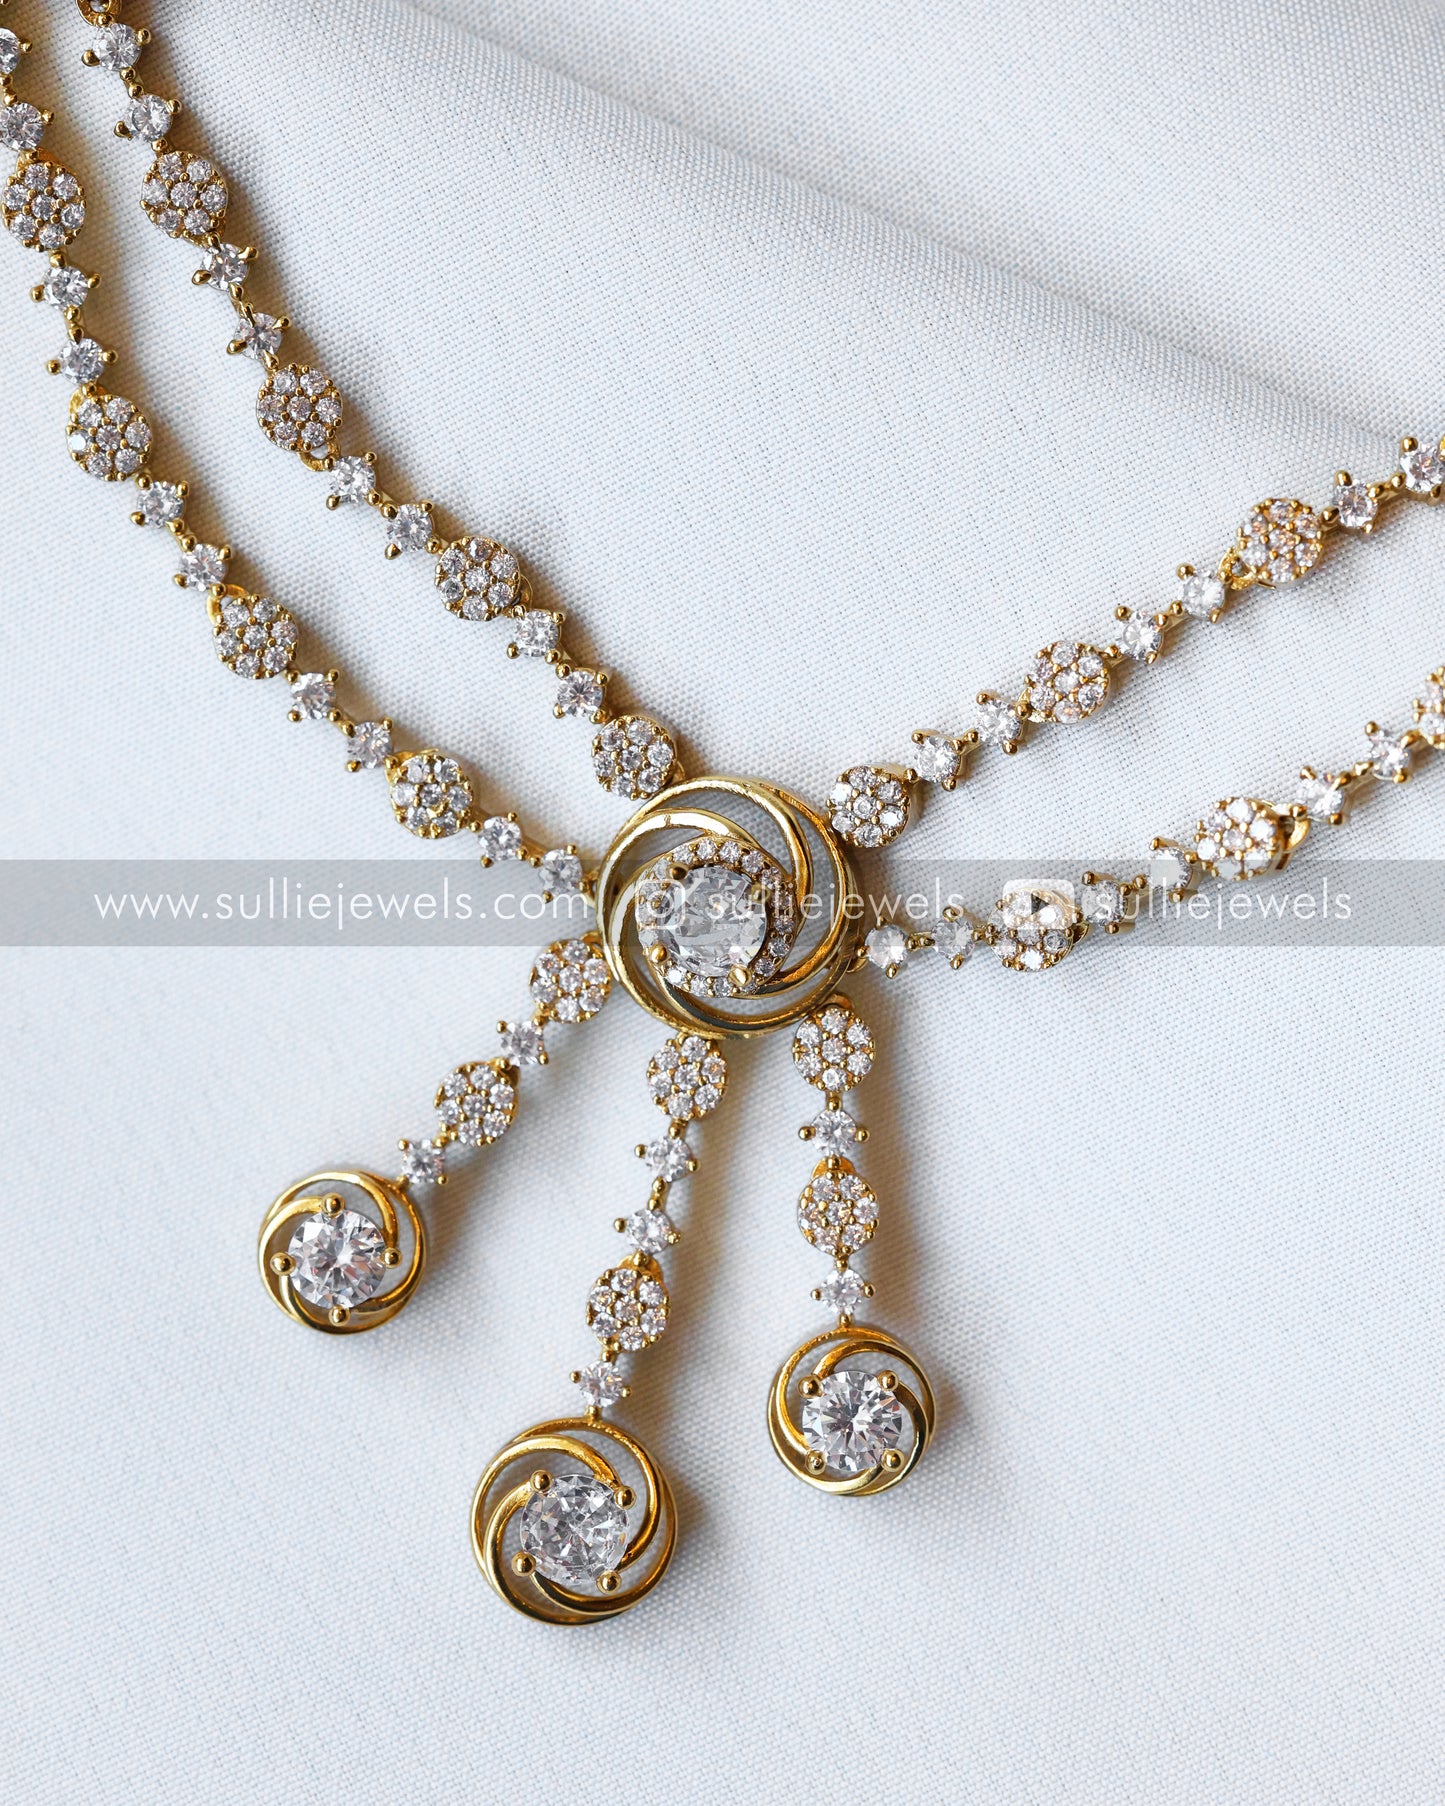 Designer Diamond Necklace with Earrings